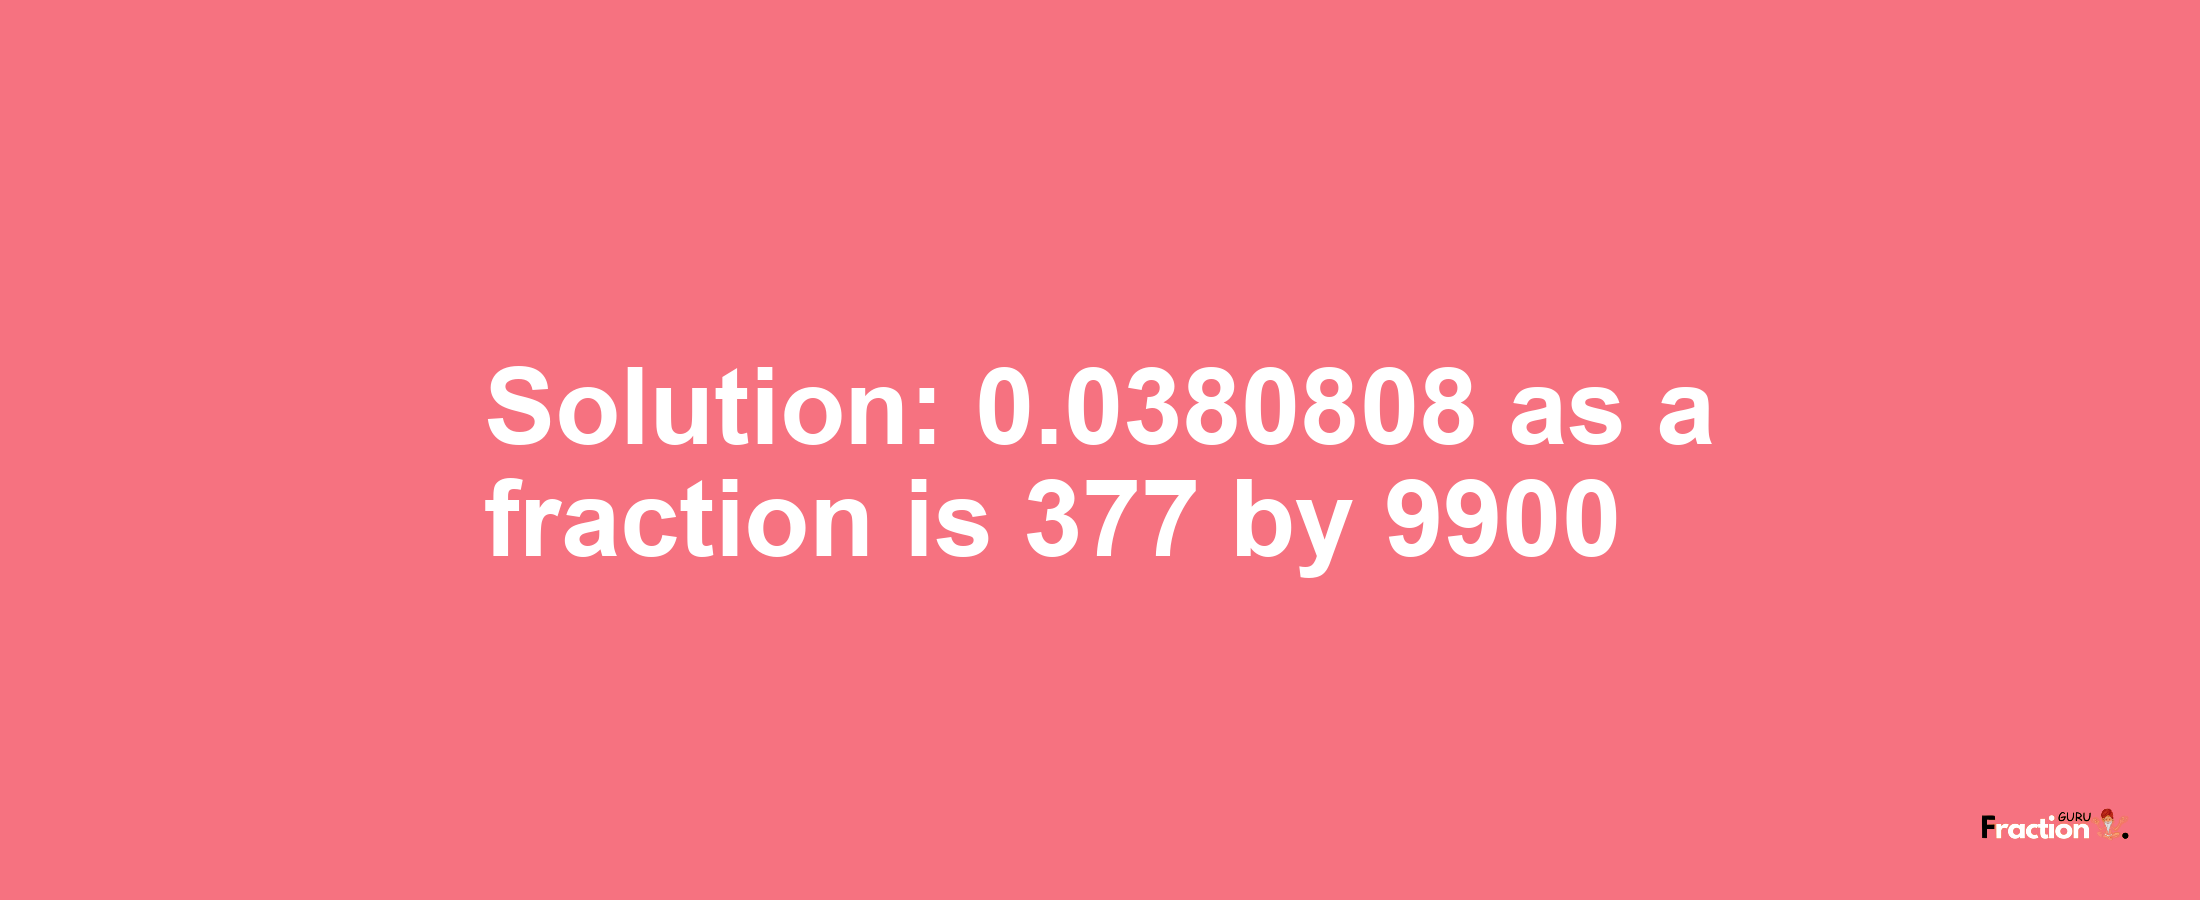 Solution:0.0380808 as a fraction is 377/9900